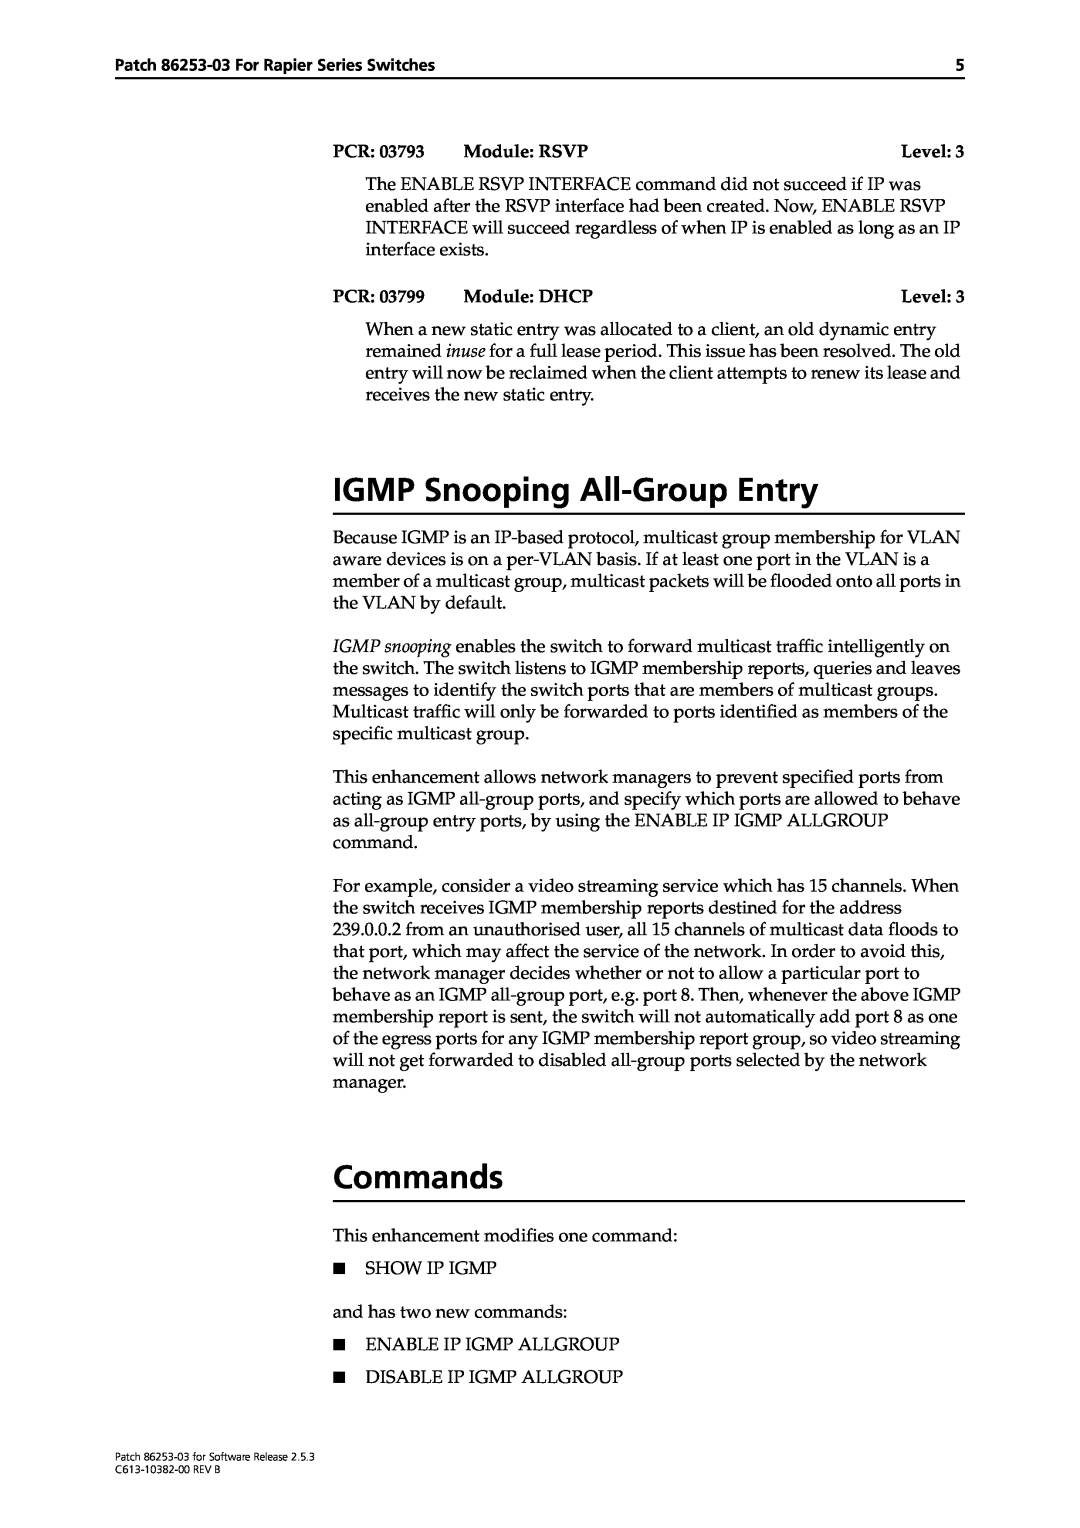 Allied Telesis Rapier Series manual IGMP Snooping All-Group Entry, Commands 